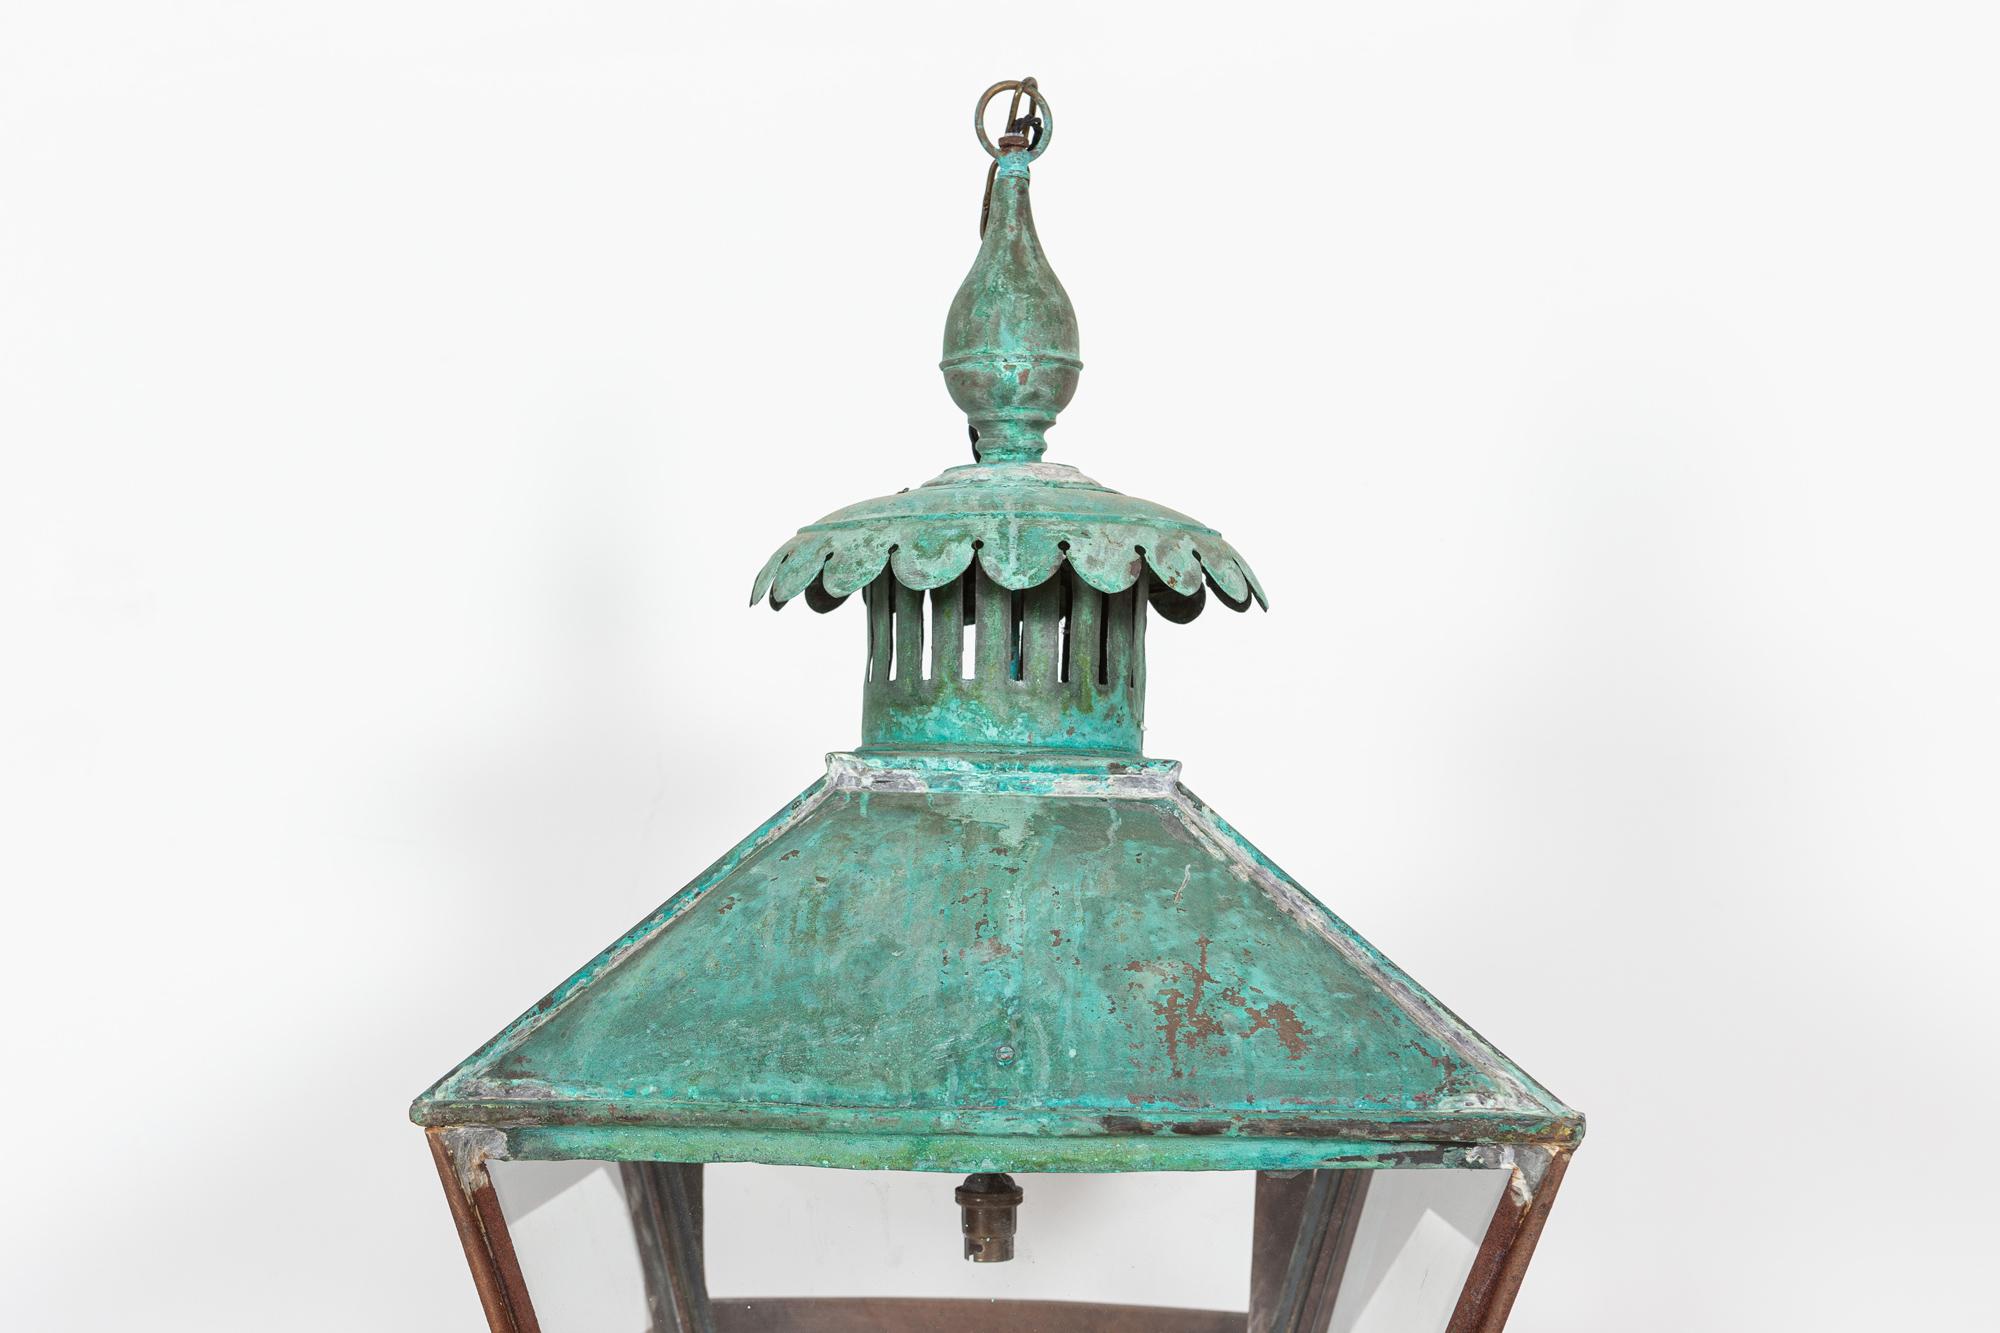 Circa 1850

19thC English Verdigris copper & iron lantern

Rewired & pat tested comes with 1m of brass chain

 

Measures: W45 x D45 x H93 cm.